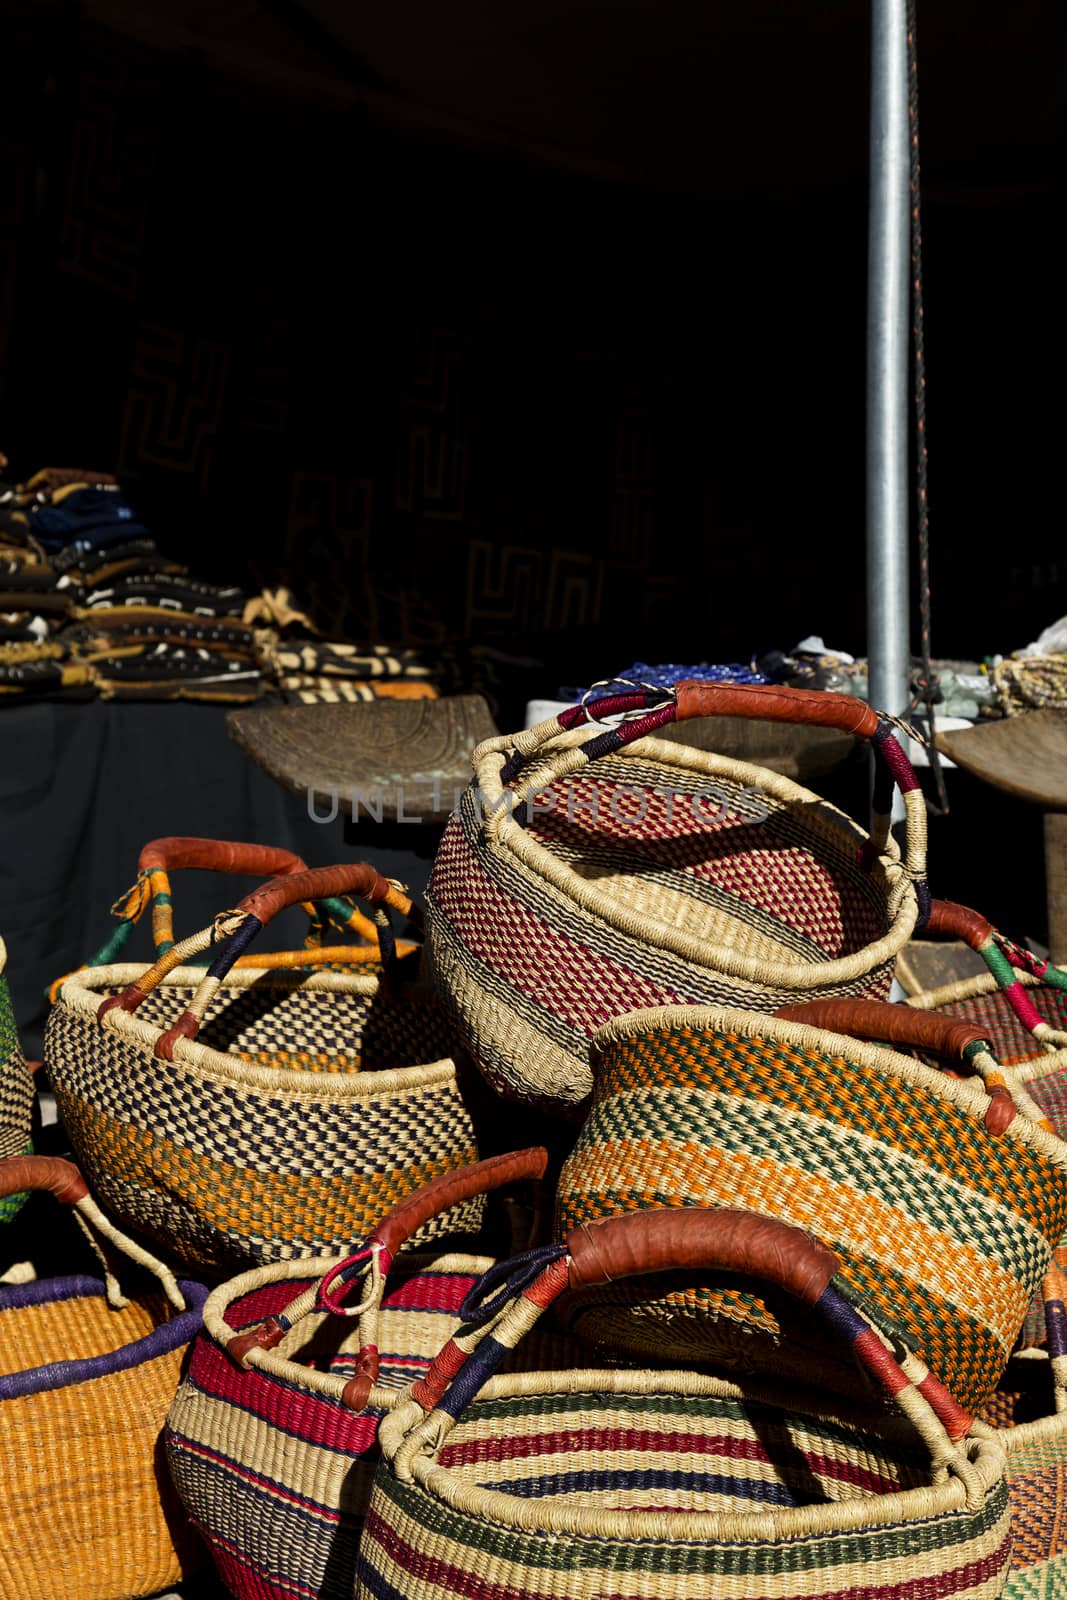 Baskets at African Art Village of Tucson Gem and Mineral Show  by fmcginn